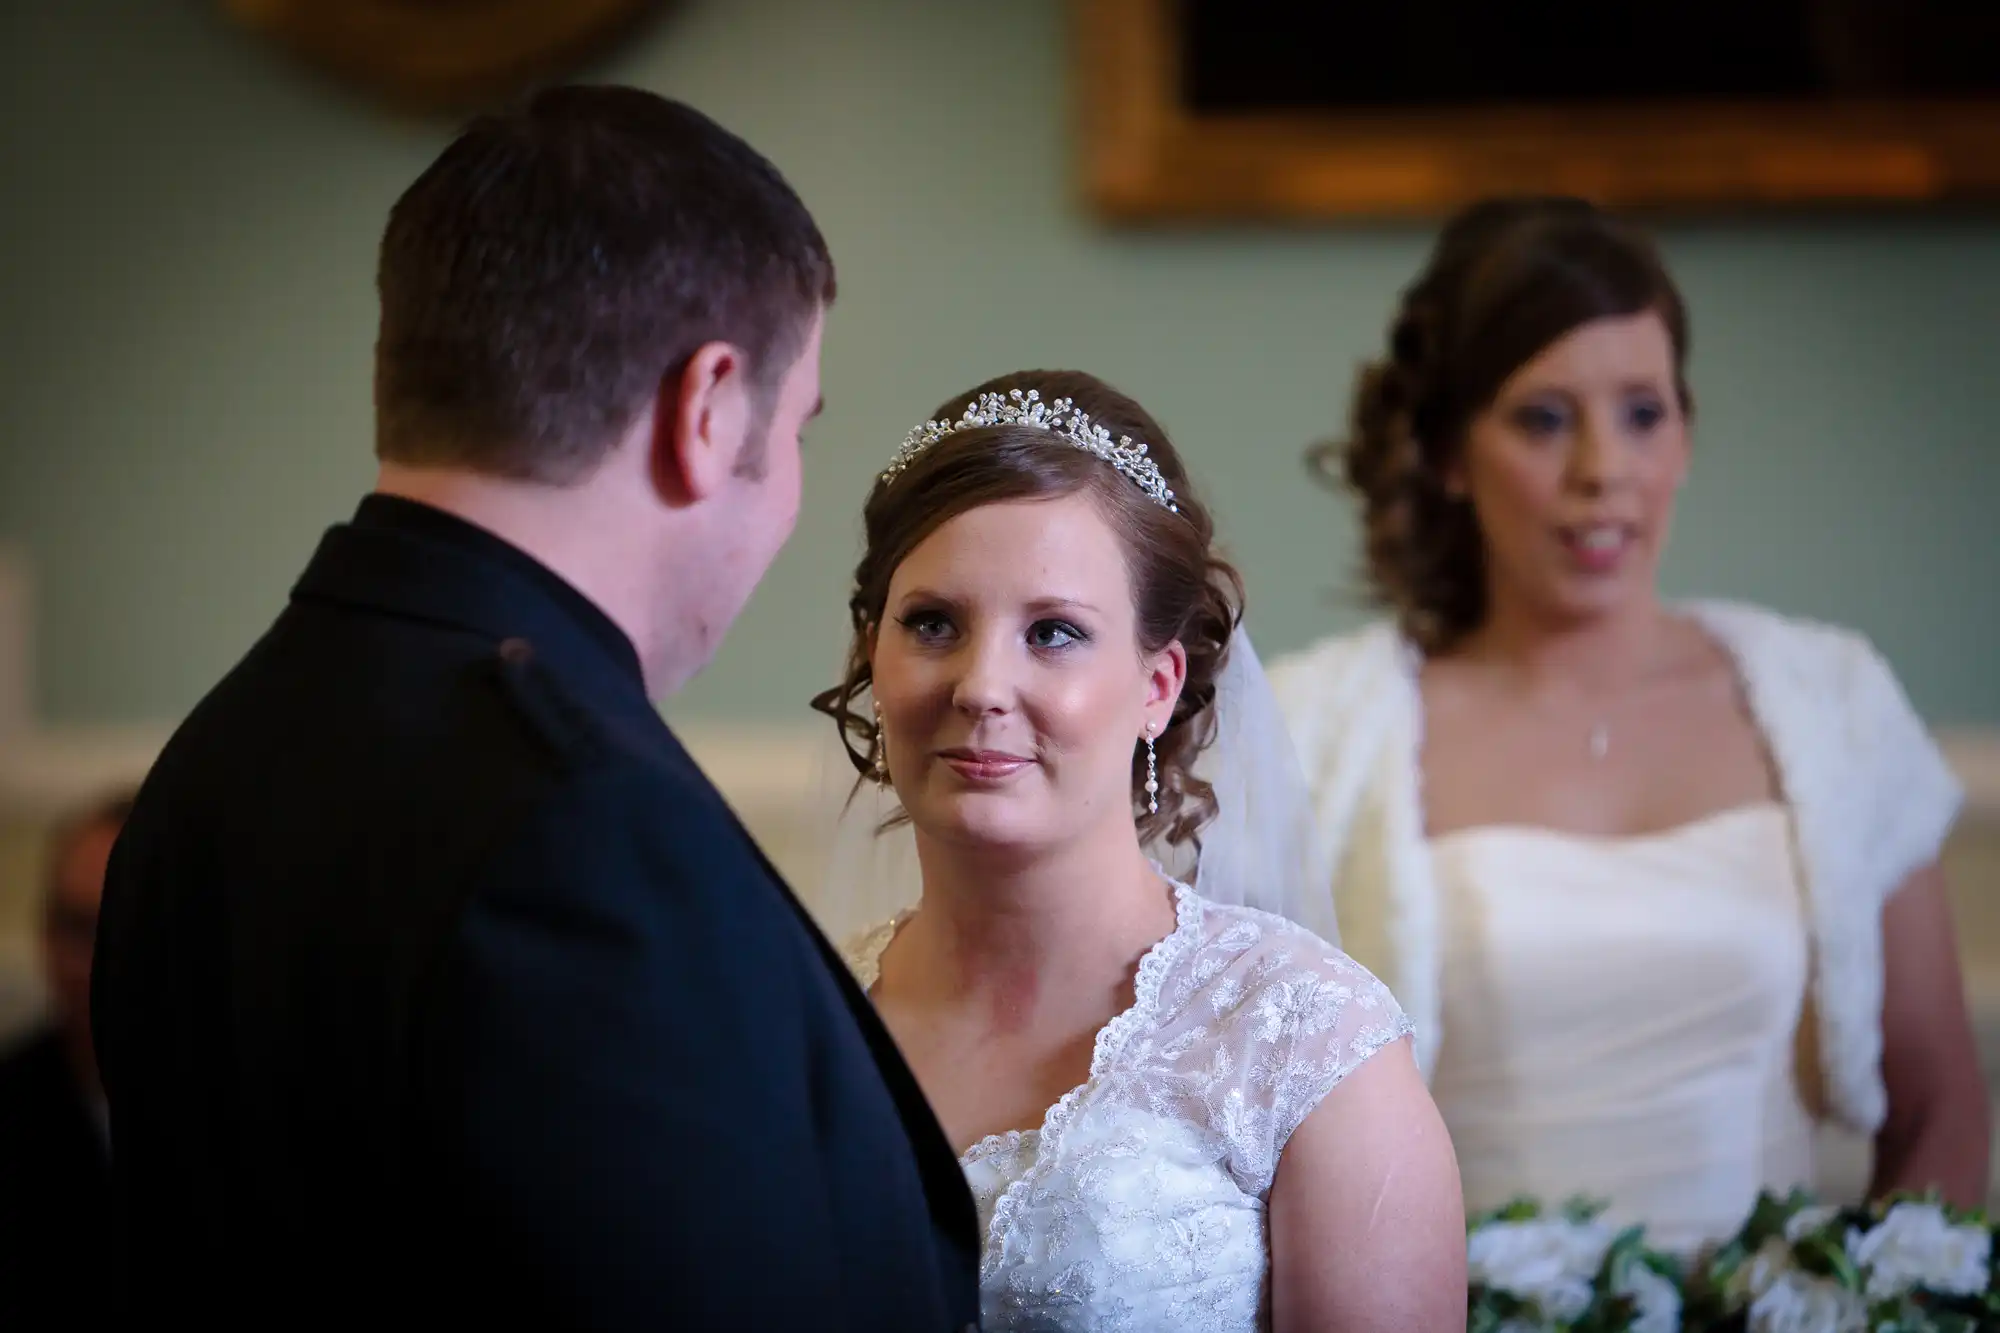 Bride in a lace dress and tiara gazes at groom with a focused expression, another woman in bridal attire in the background.